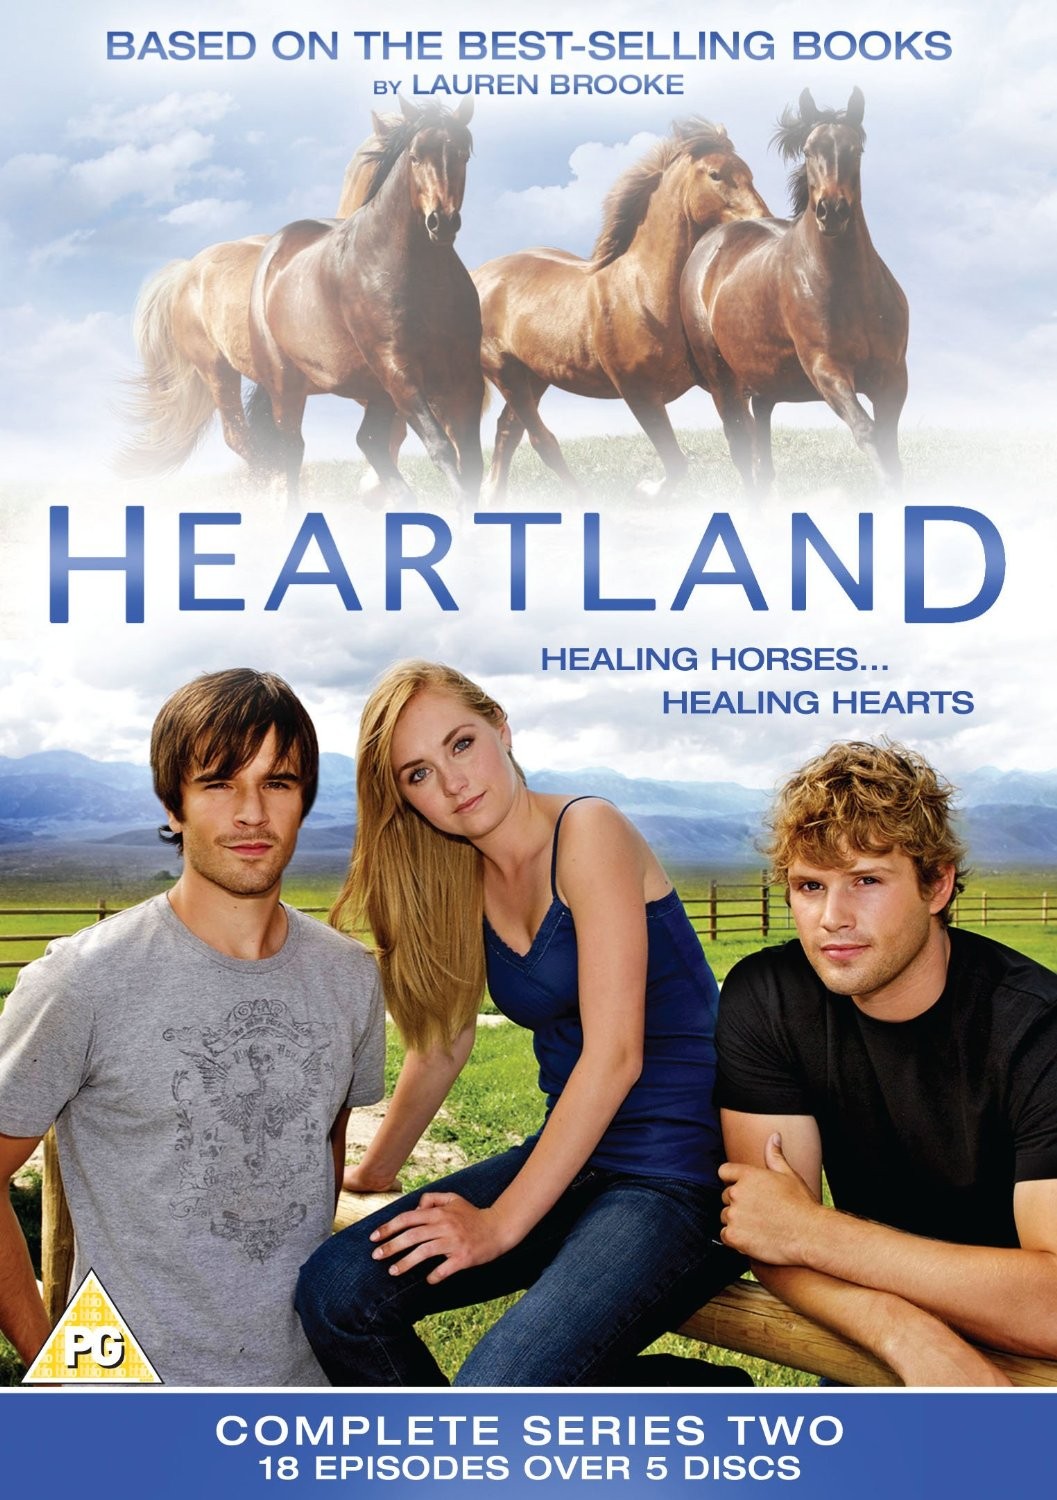 Heartland The Complete Series Two DVD Box Set from trot-online